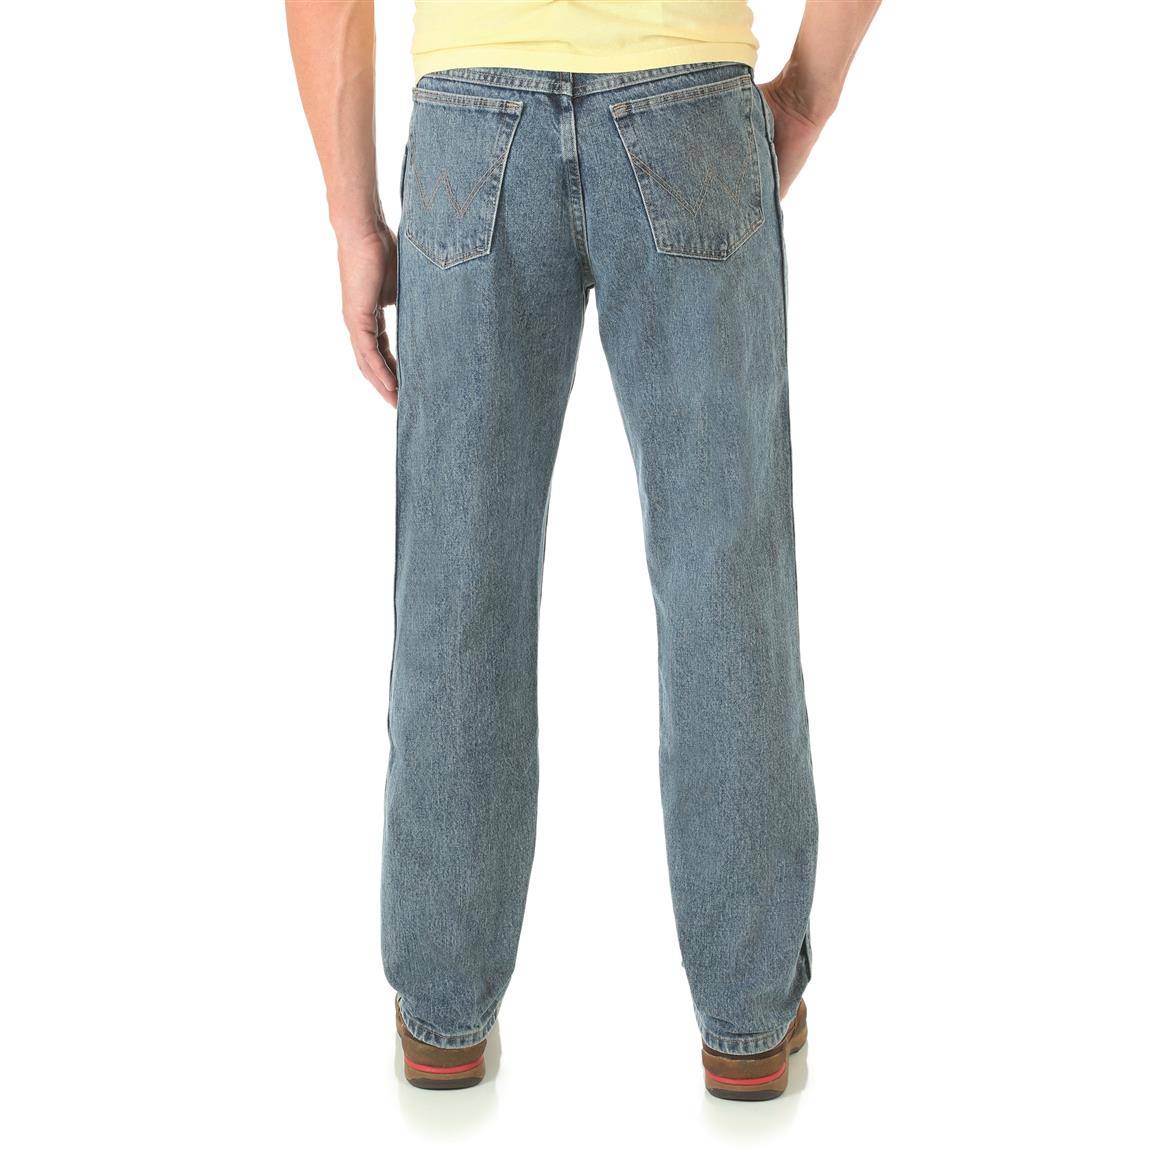 Wrangler Rugged Wear Men's Relaxed Fit Jeans, High Rise - 697502, Jeans ...